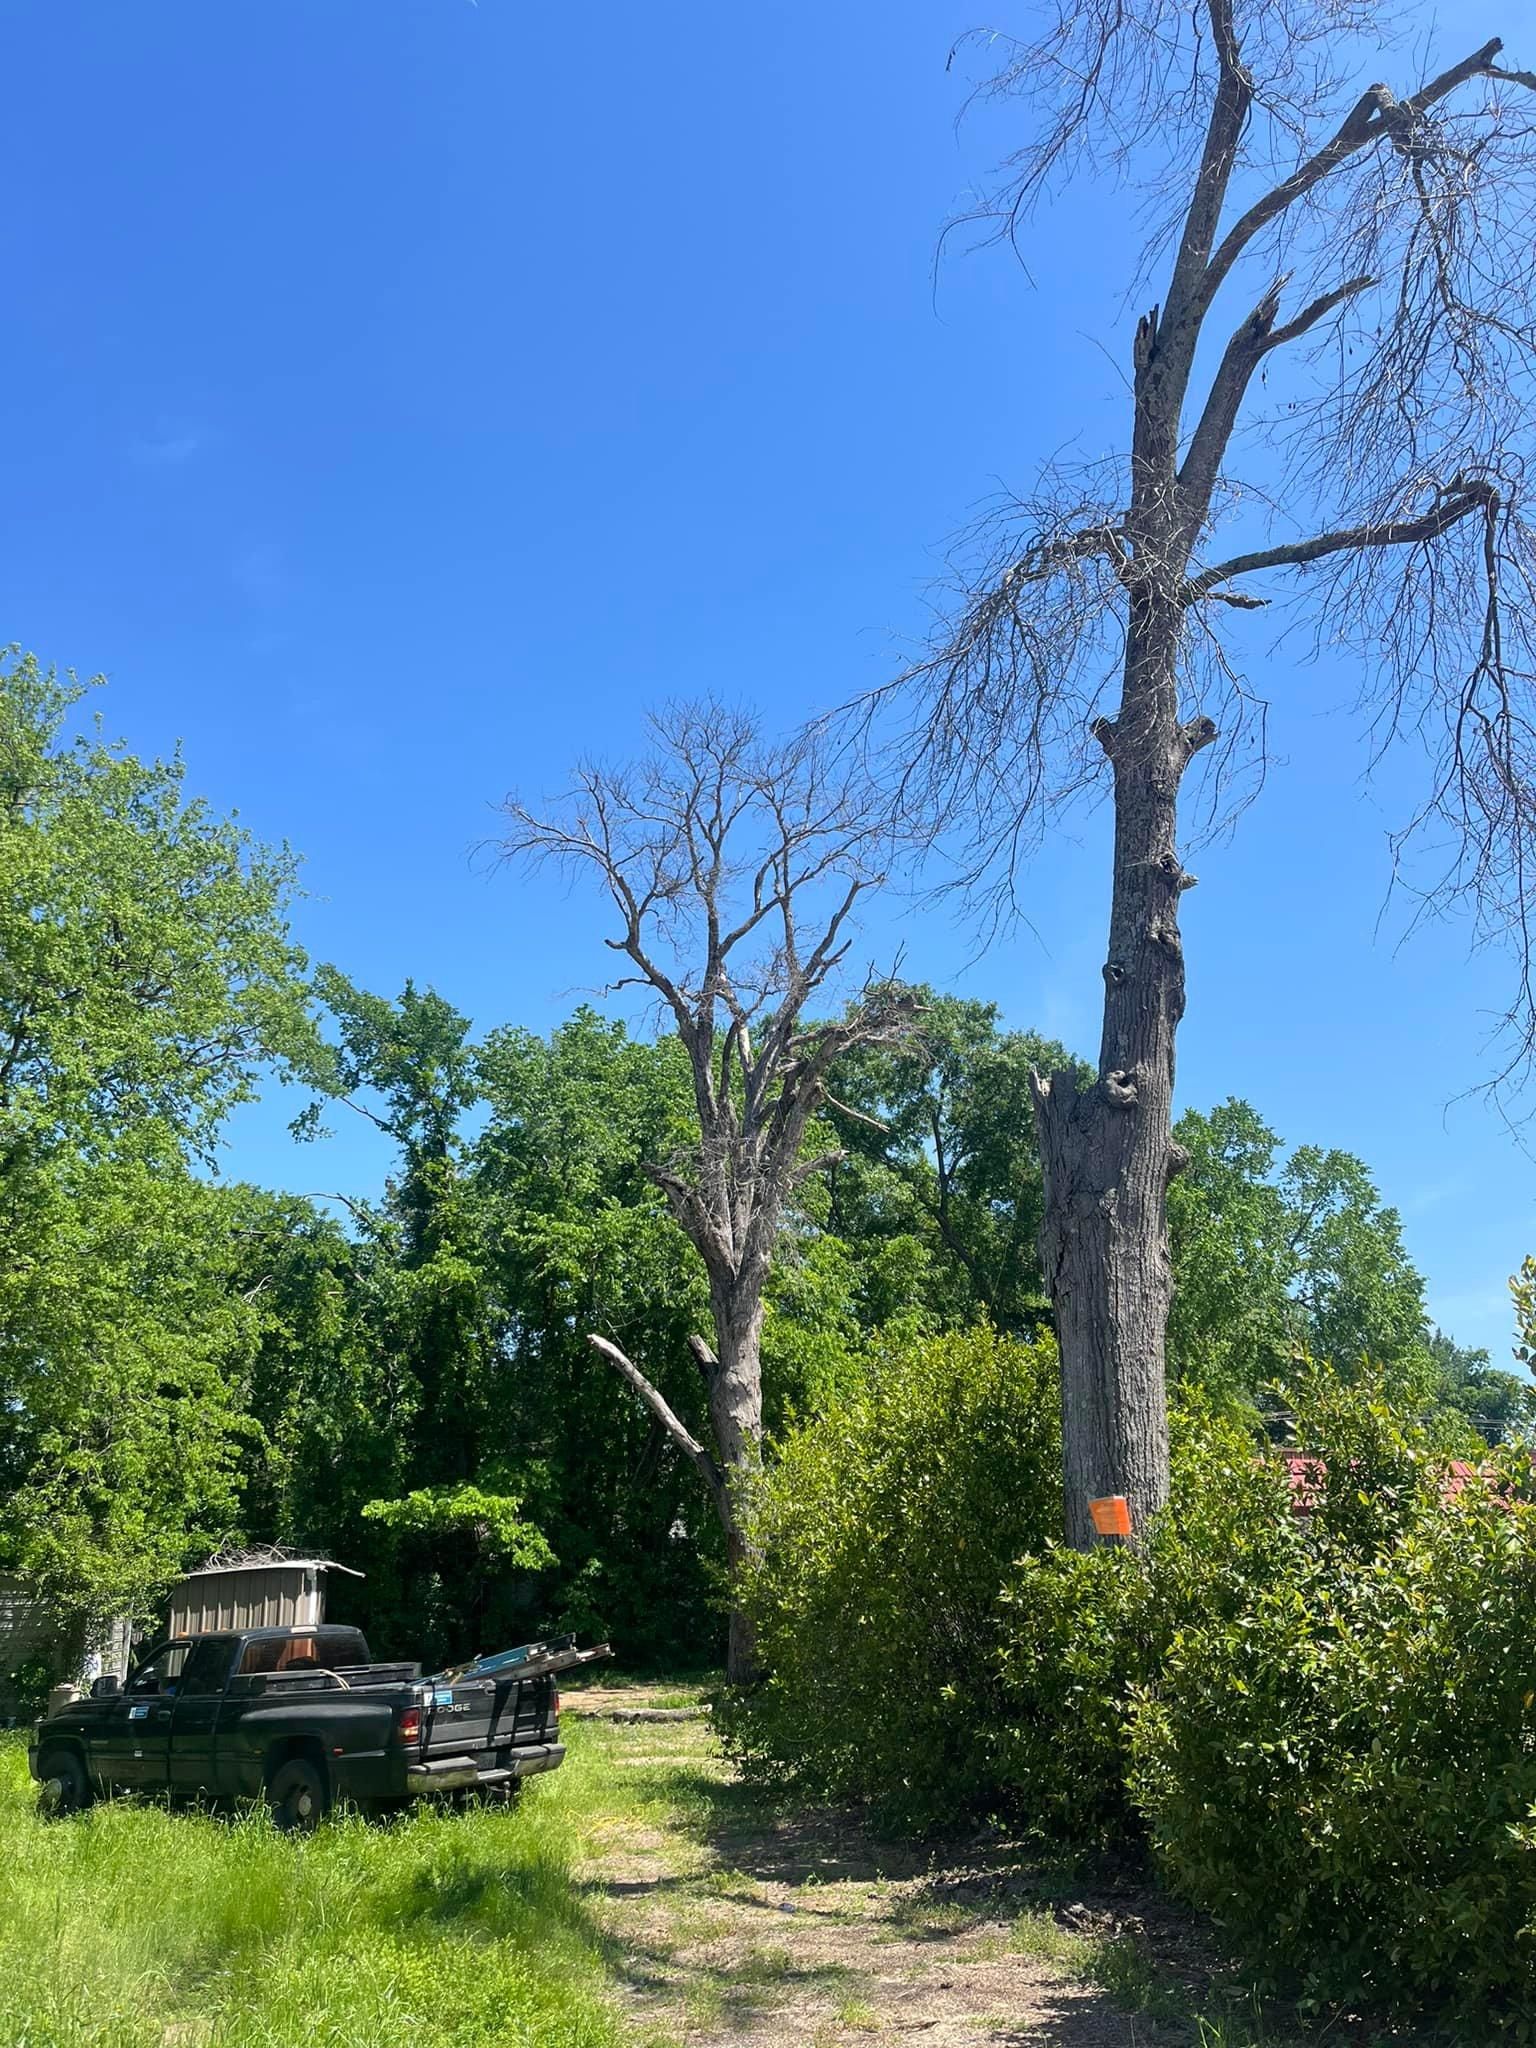 All Photos for Banda’s Tree Service And Lawn Care in Tyler, TX